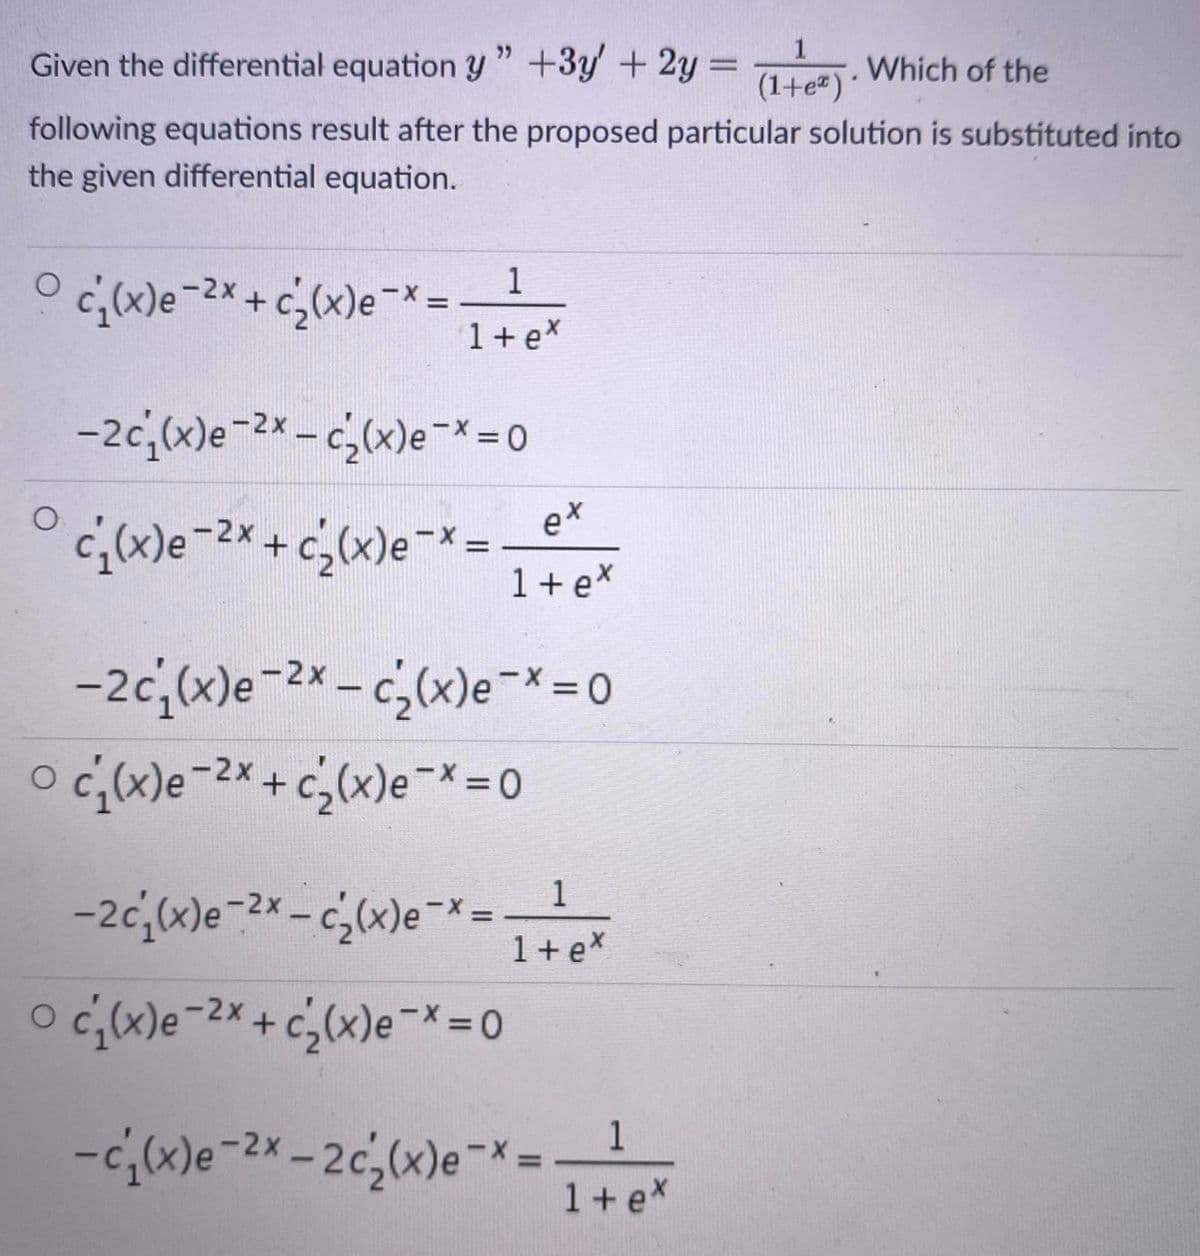 Given the differential equation y" +3y + 2y =
Which of the
%3D
(1+e")
following equations result after the proposed particular solution is substituted into
the given differential equation.
-2x
1
%3D
1 + ex
-2c,x)e-2x - c,(x)e-* 0
ex
c;(x)e-2* + c¿(x)e¯* =
1 + ex
%3D
-2c,(x)e-2x - c,(x)e-X= 0
c;(x)e-2× + c,(x)e-* =0
1
-2c;(x)e¯2× – c;(x)e¬L
|
1+ex
o c;)e-2*+c;(x)e¯*= 0
-2x
1
1+ex
